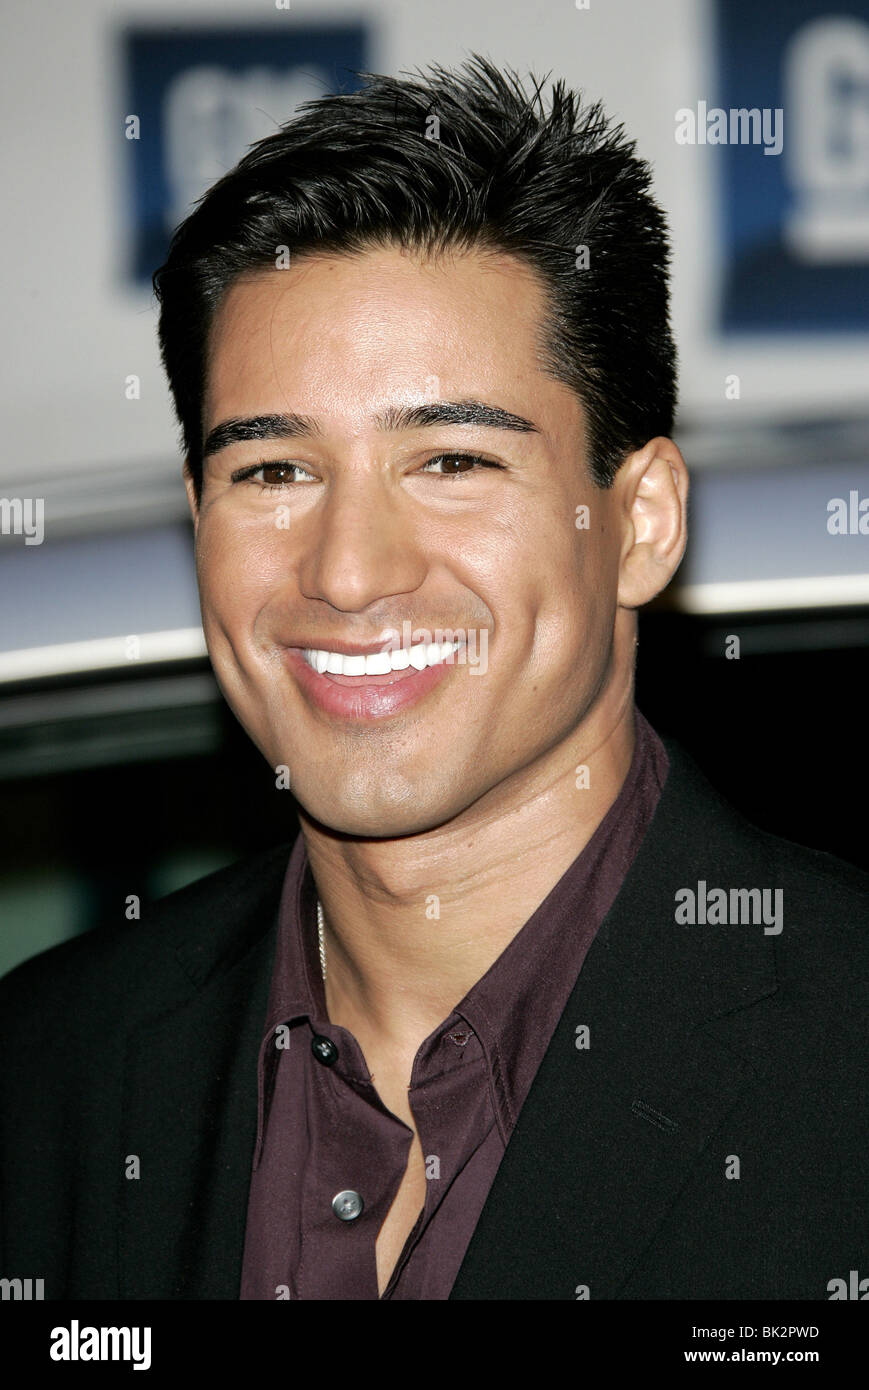 MARIO LOPEZ 10 GM 2007 FASHION SHOW HOLLYWOOD LOS ANGELES USA 20 Février 2007 Banque D'Images